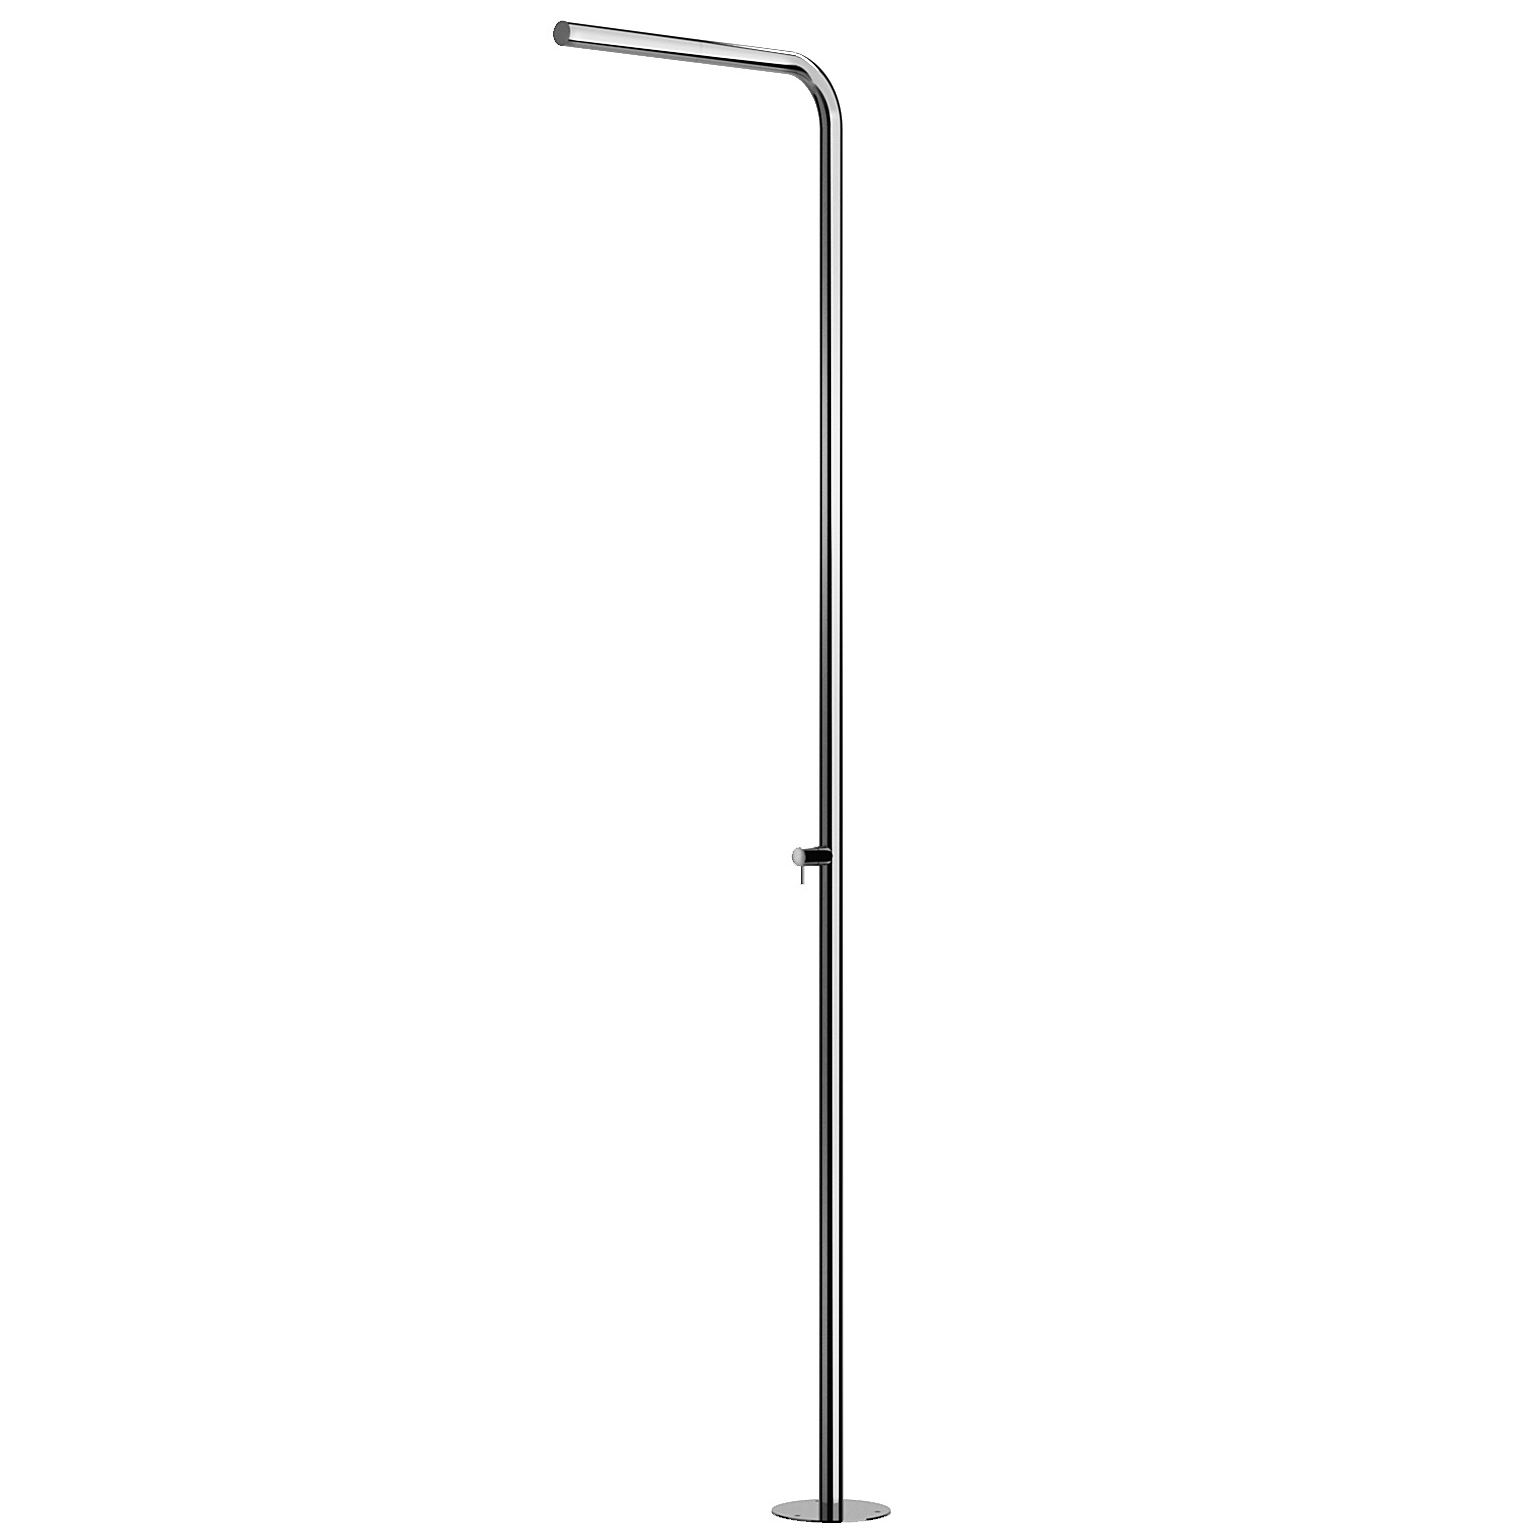 Skinny S40 316 Marine Grade Stainless Steel Free Standing Hot and Cold Shower Column